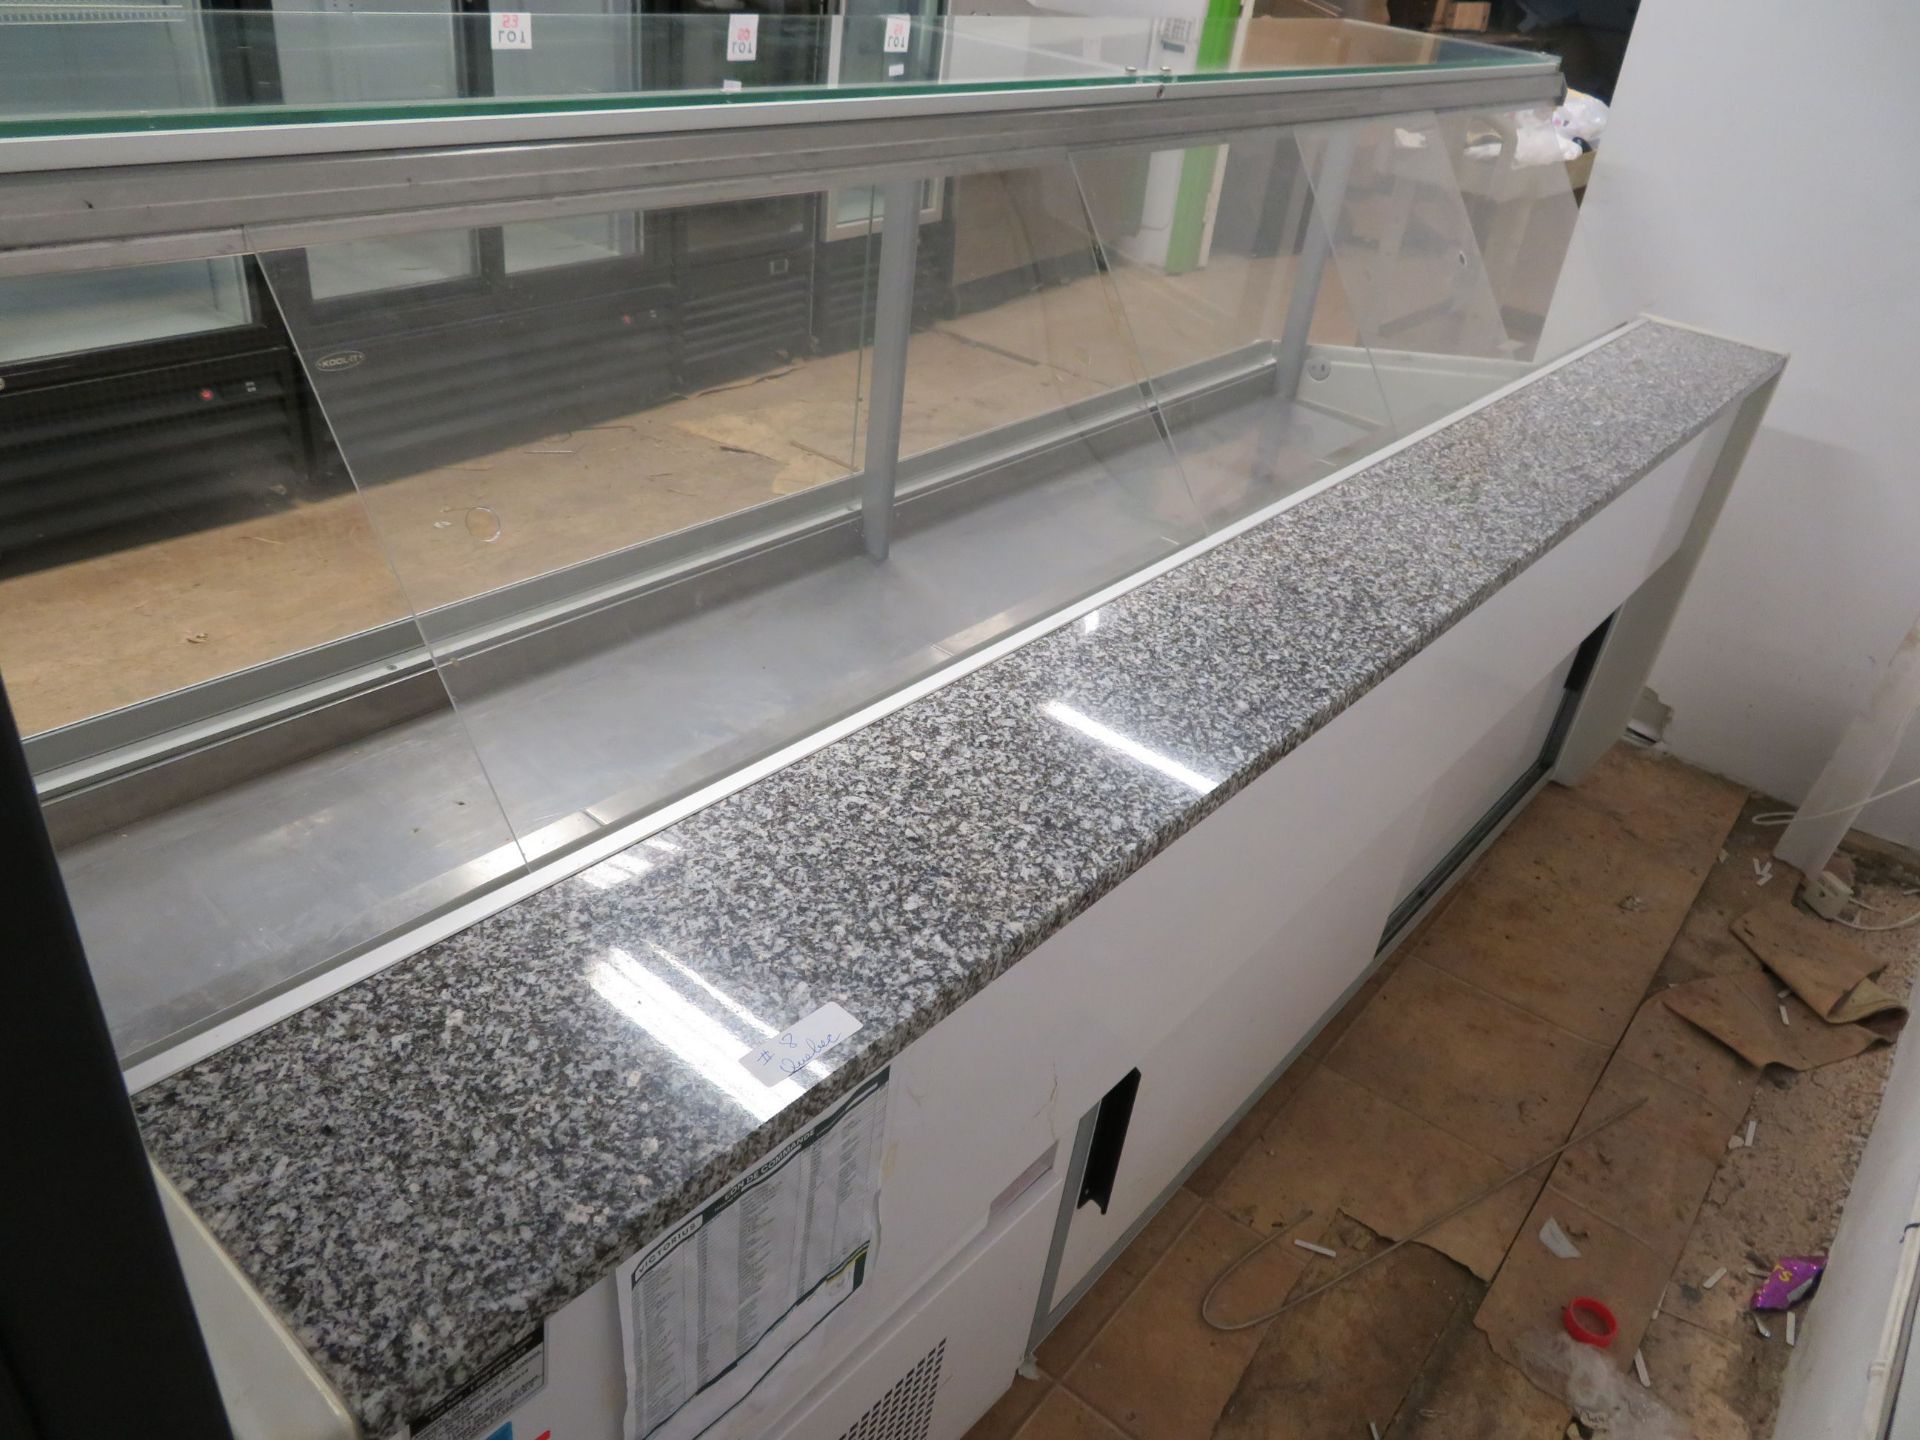 IGLOO refrigerated deli counter, glass display unit, Mod: SUMD8, approx. 96"w x 37"d x 50"h - Image 3 of 5